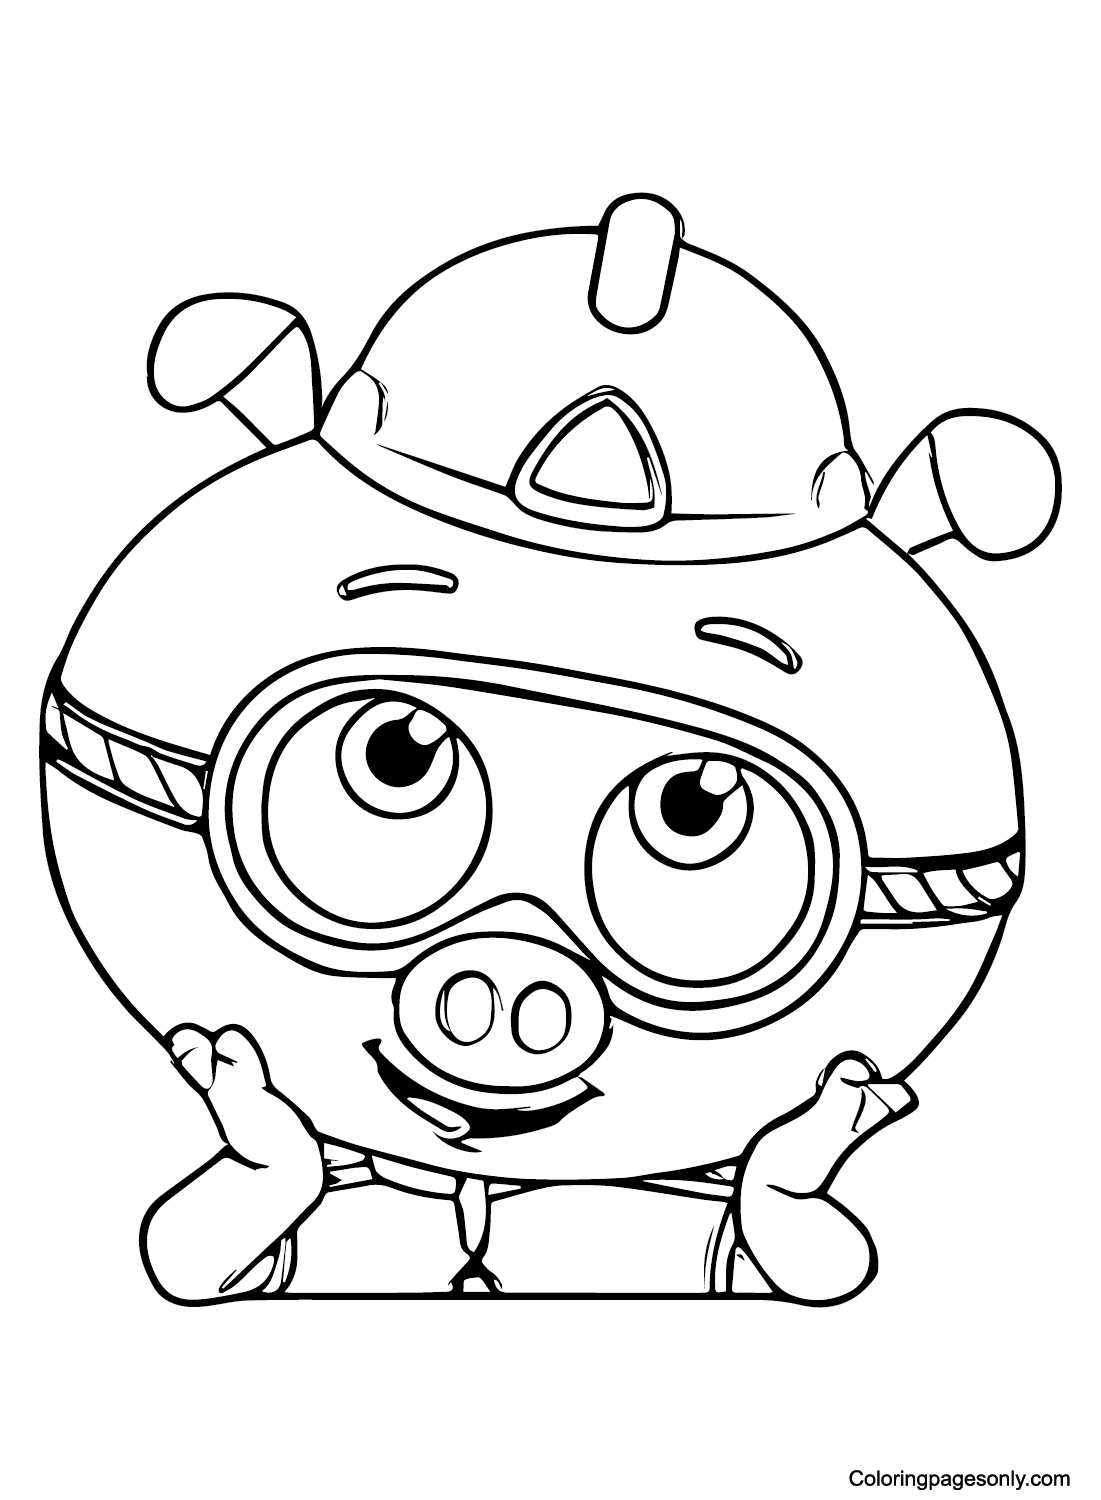 Cute Alpha Pig Coloring Page